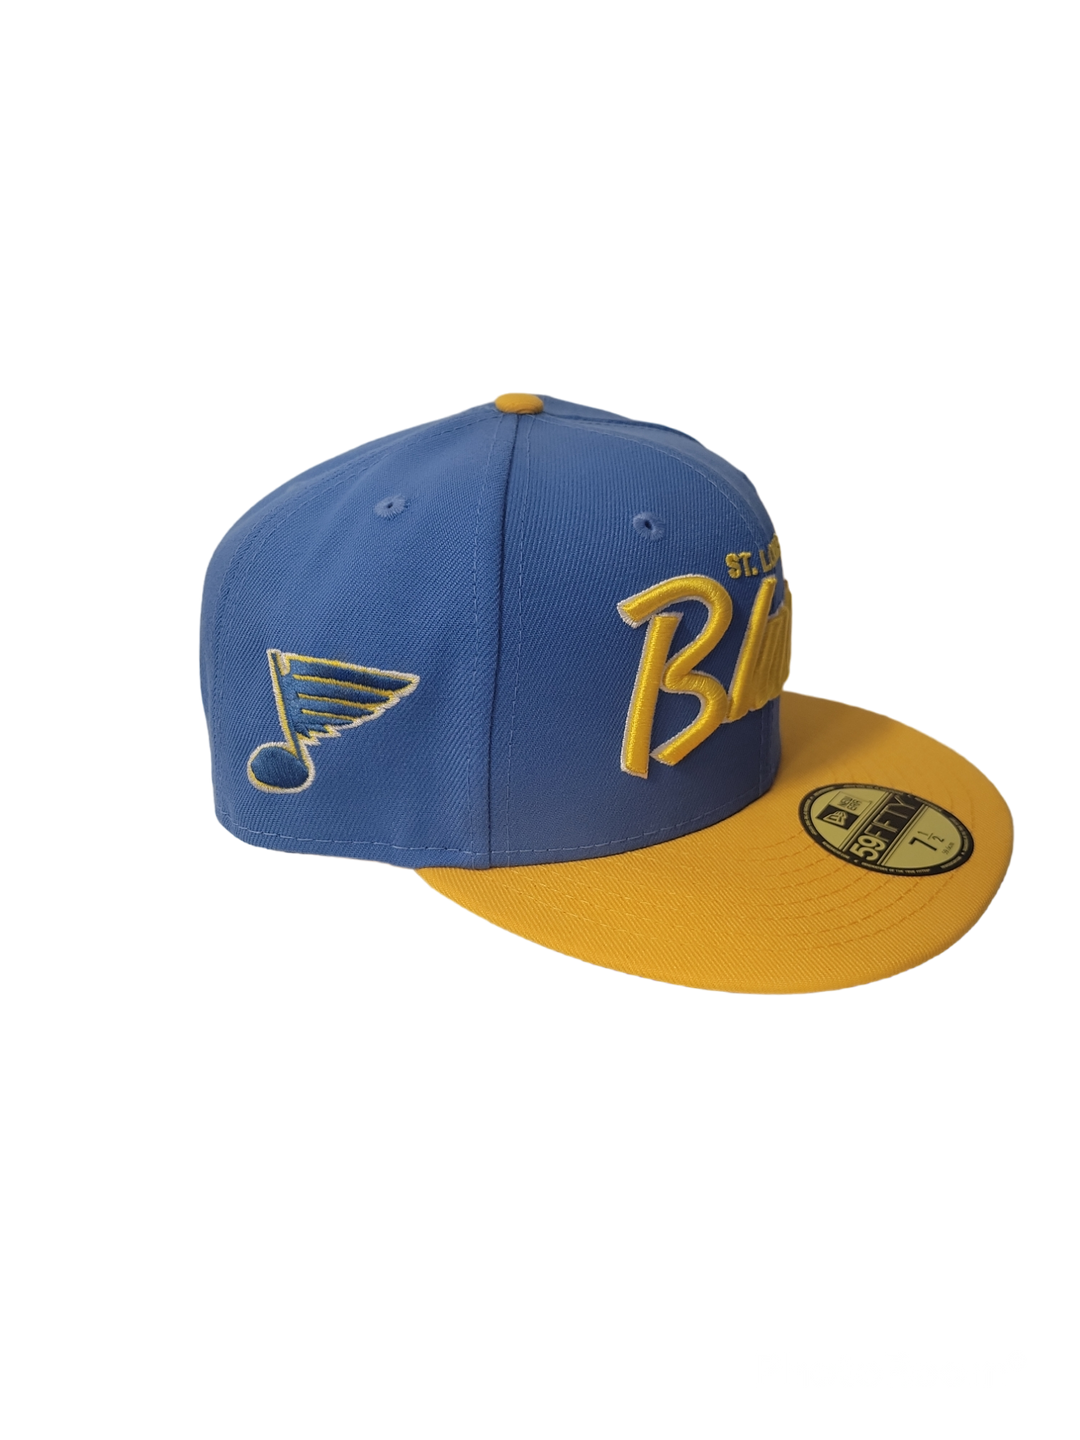 ST. LOUIS BLUES NEW ERA 5950 HERITAGE SCRIPT AIR FORCE BLUE AND GOLD FITTED HAT